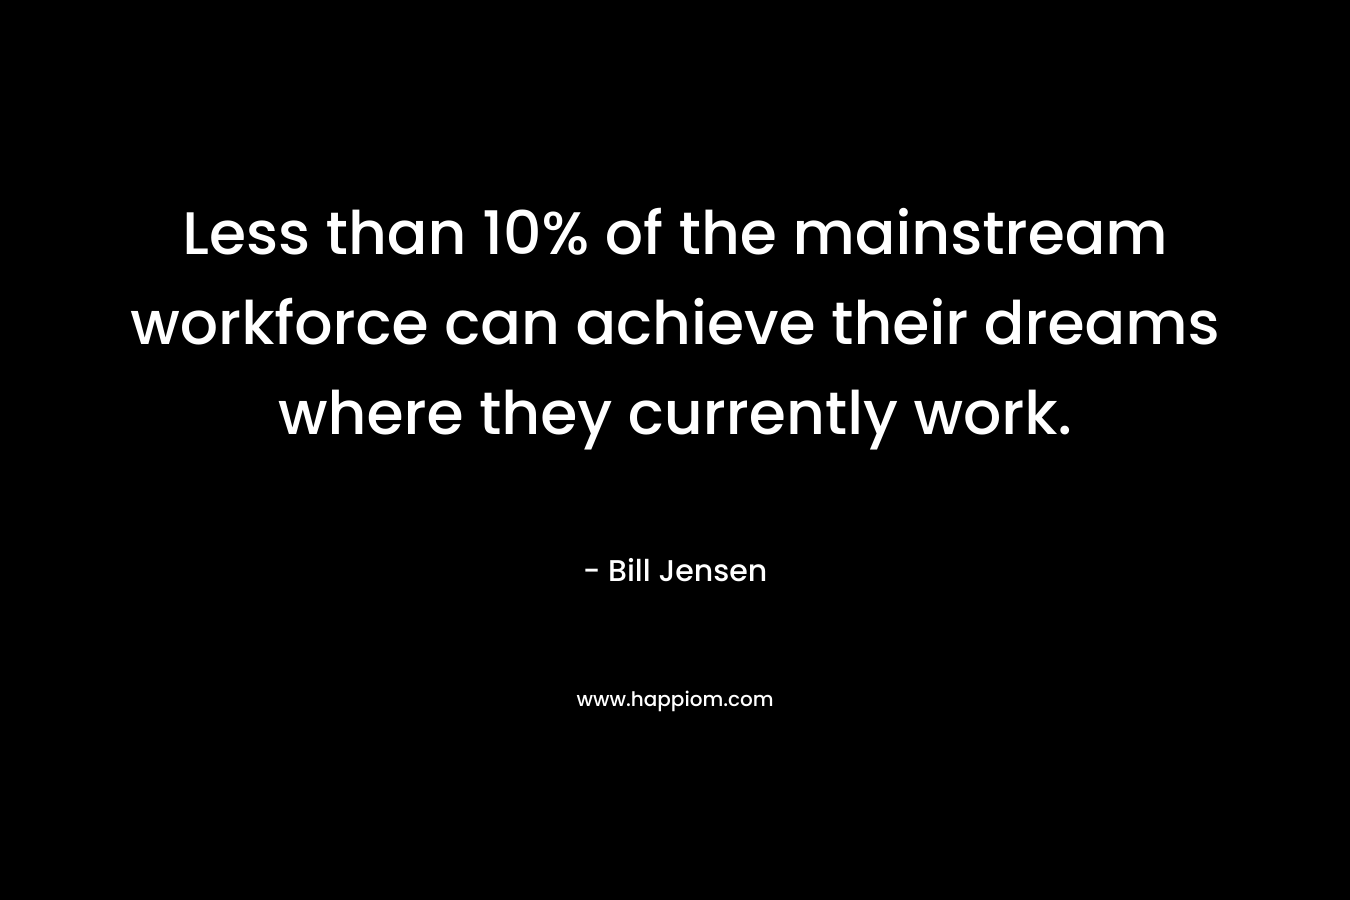 Less than 10% of the mainstream workforce can achieve their dreams where they currently work. – Bill Jensen